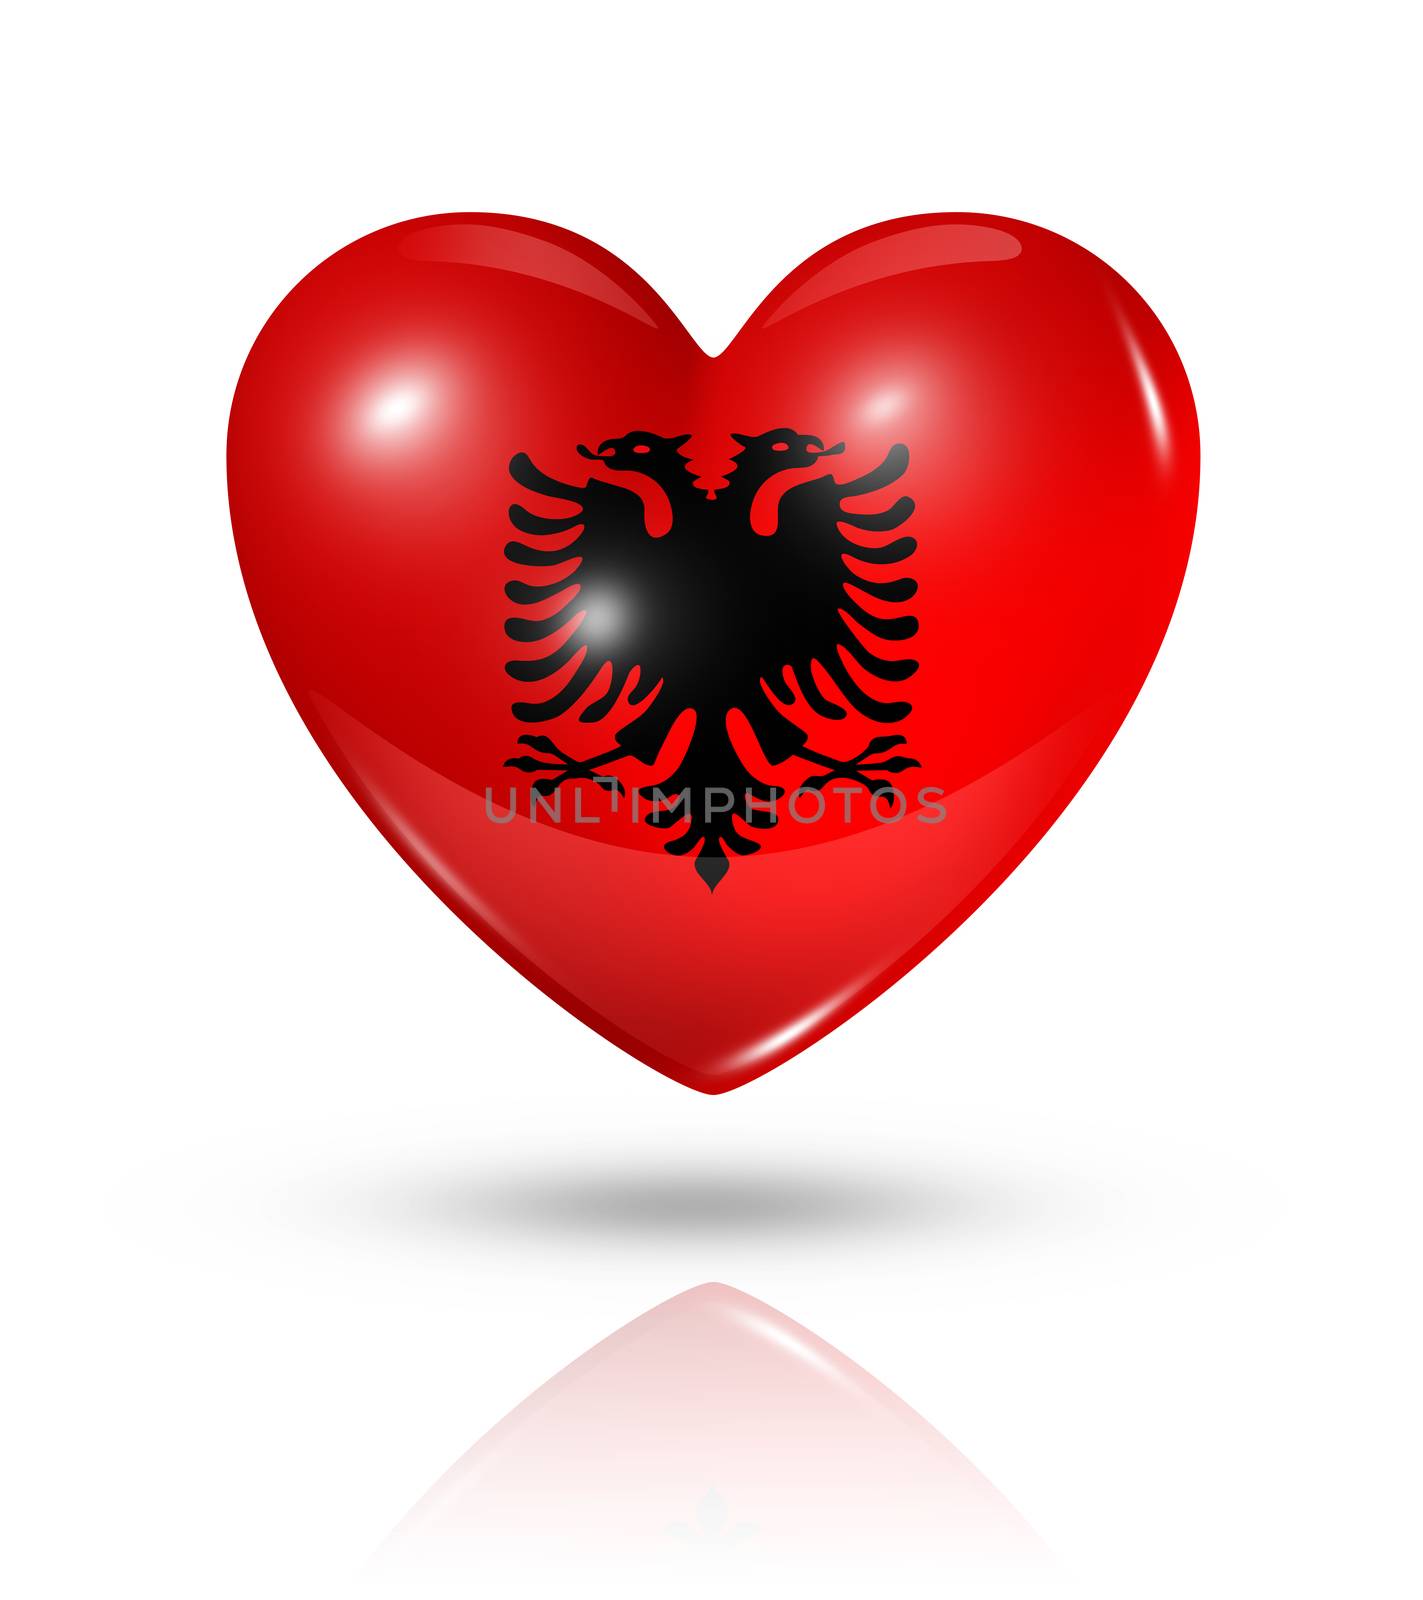 Love Albania, heart flag icon by daboost